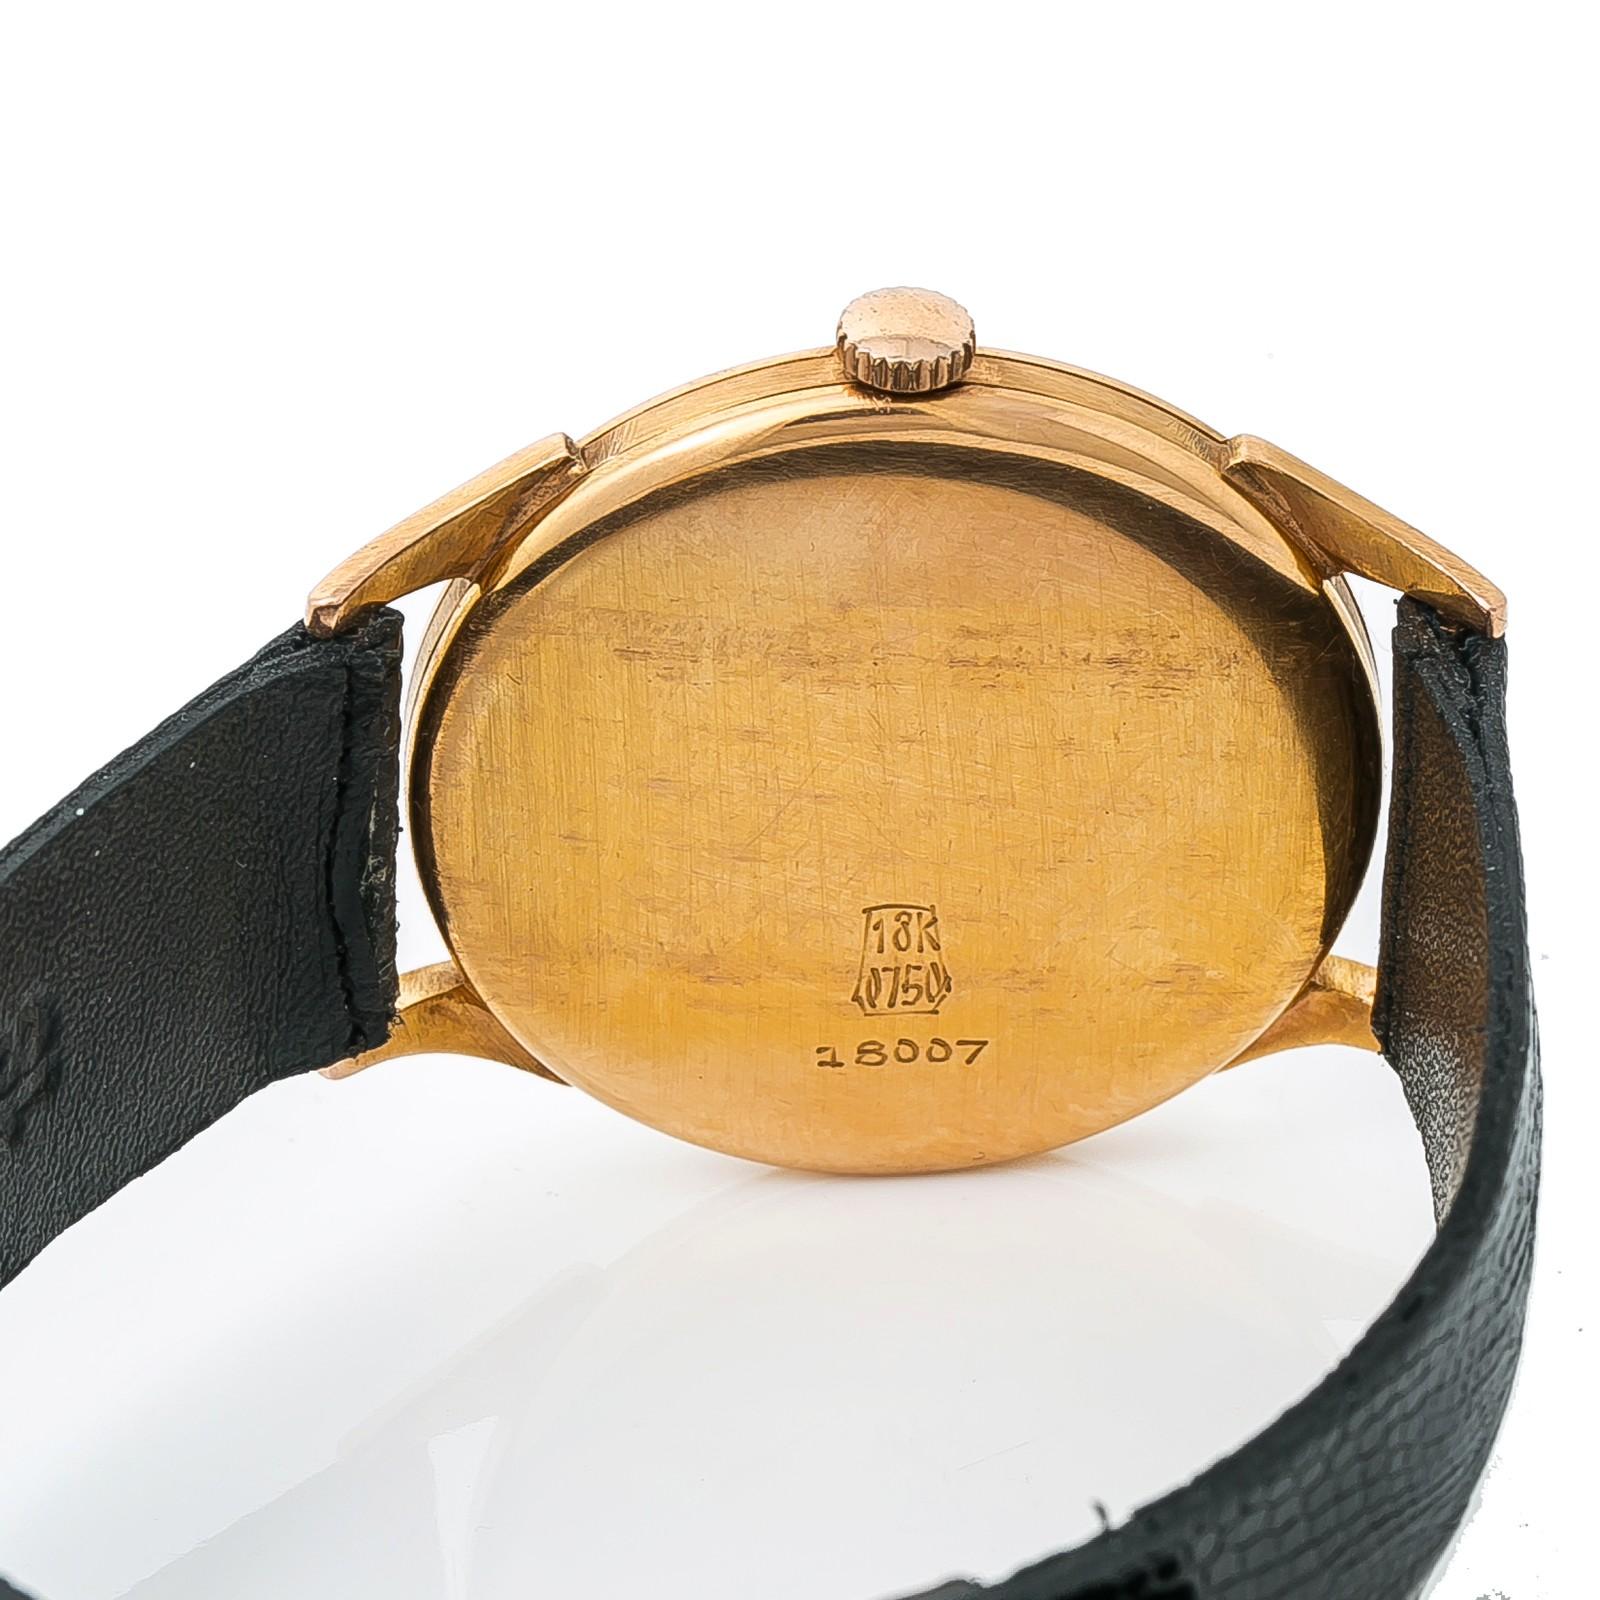 Girard Perragaux Vintage Reference #:0. None. Verified and Certified by WatchFacts. 1 year warranty offered by WatchFacts.
